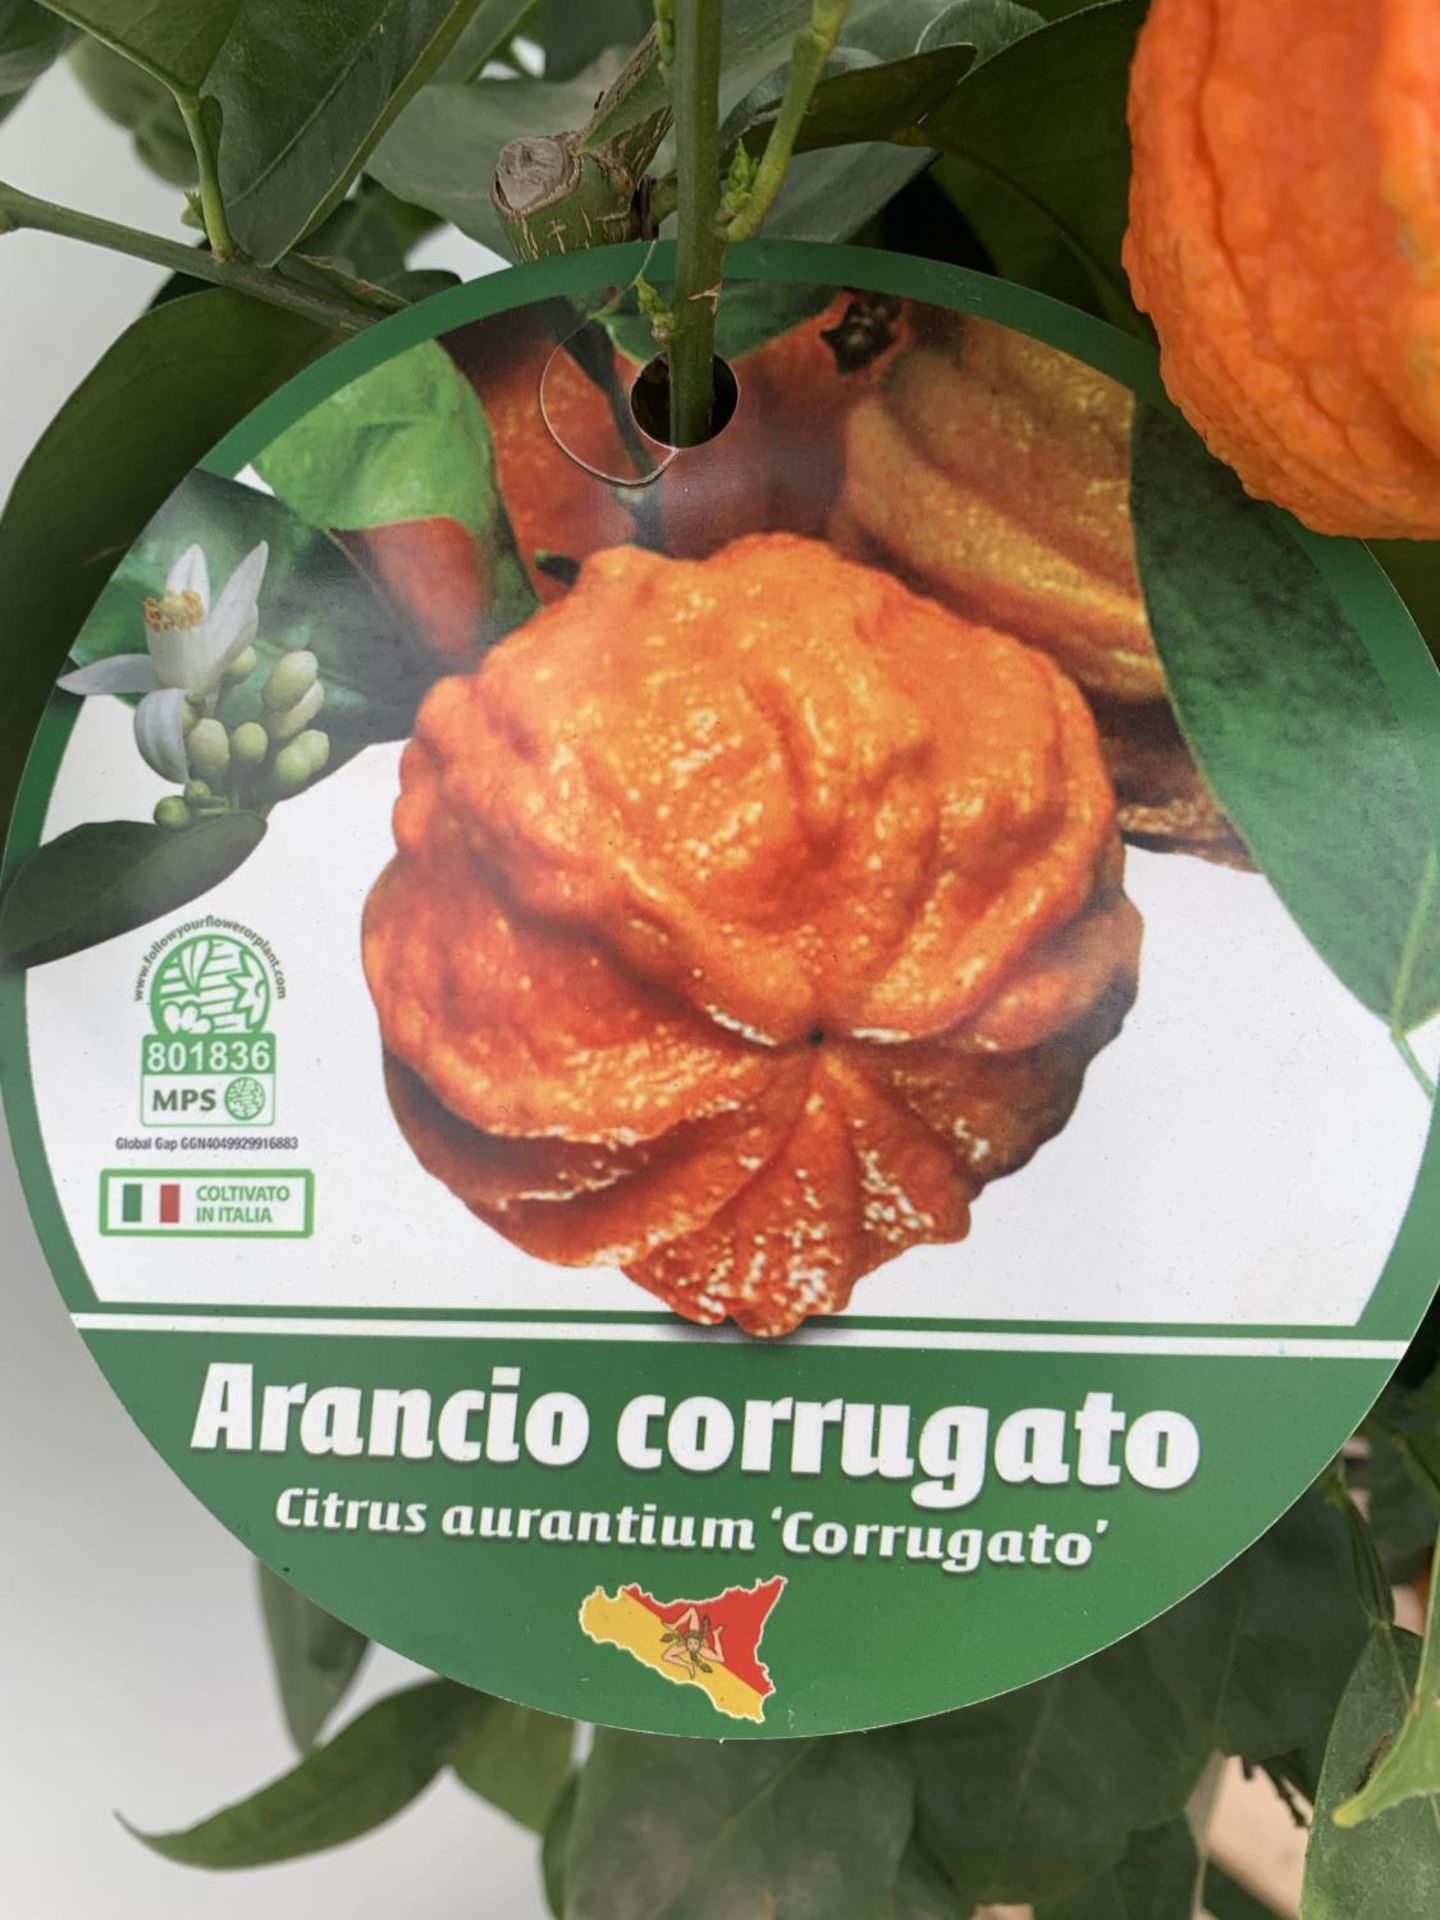 ONE ARANCIO CORRUGATO RARE CITRUS ORANGE FRUIT TREE WITH FRUIT APPROX 150CM IN HEIGHT IN A 25LTR POT - Image 4 of 9